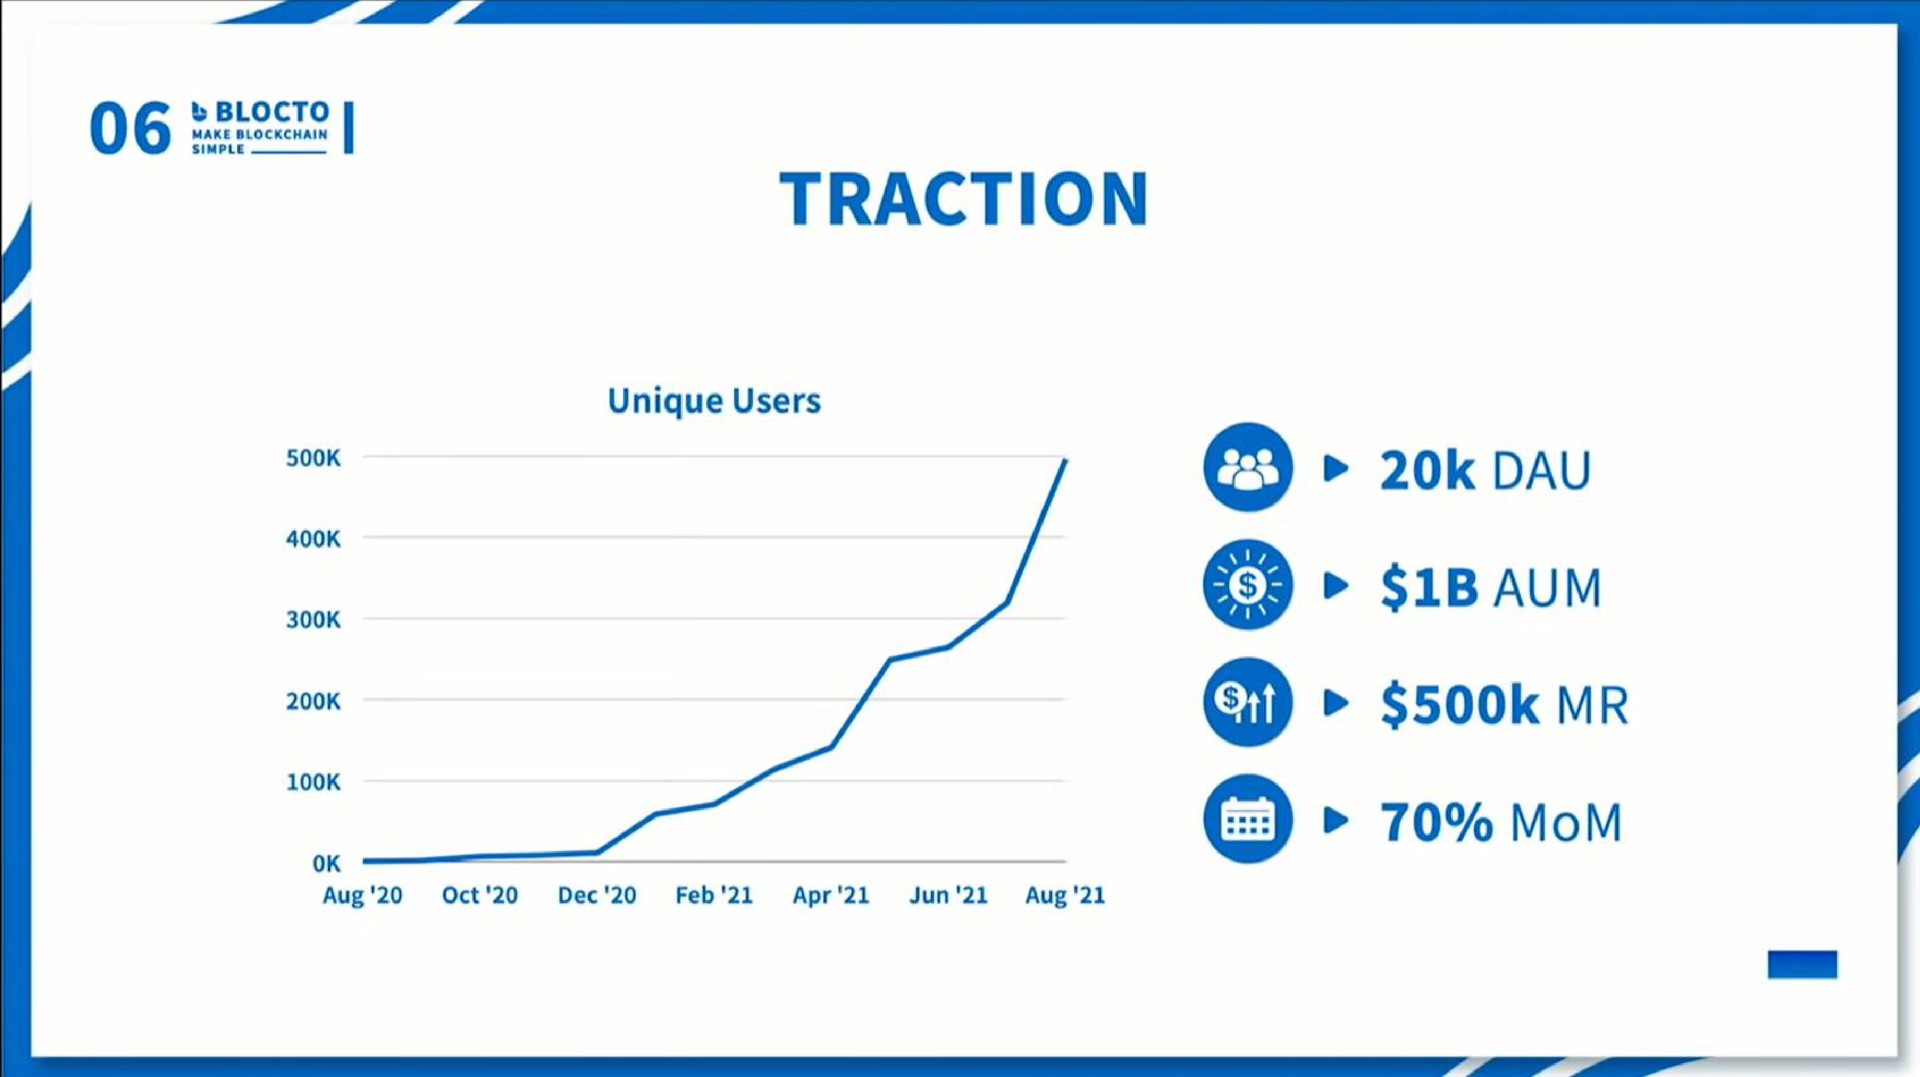 traction unique users a a so aum as | Blocto